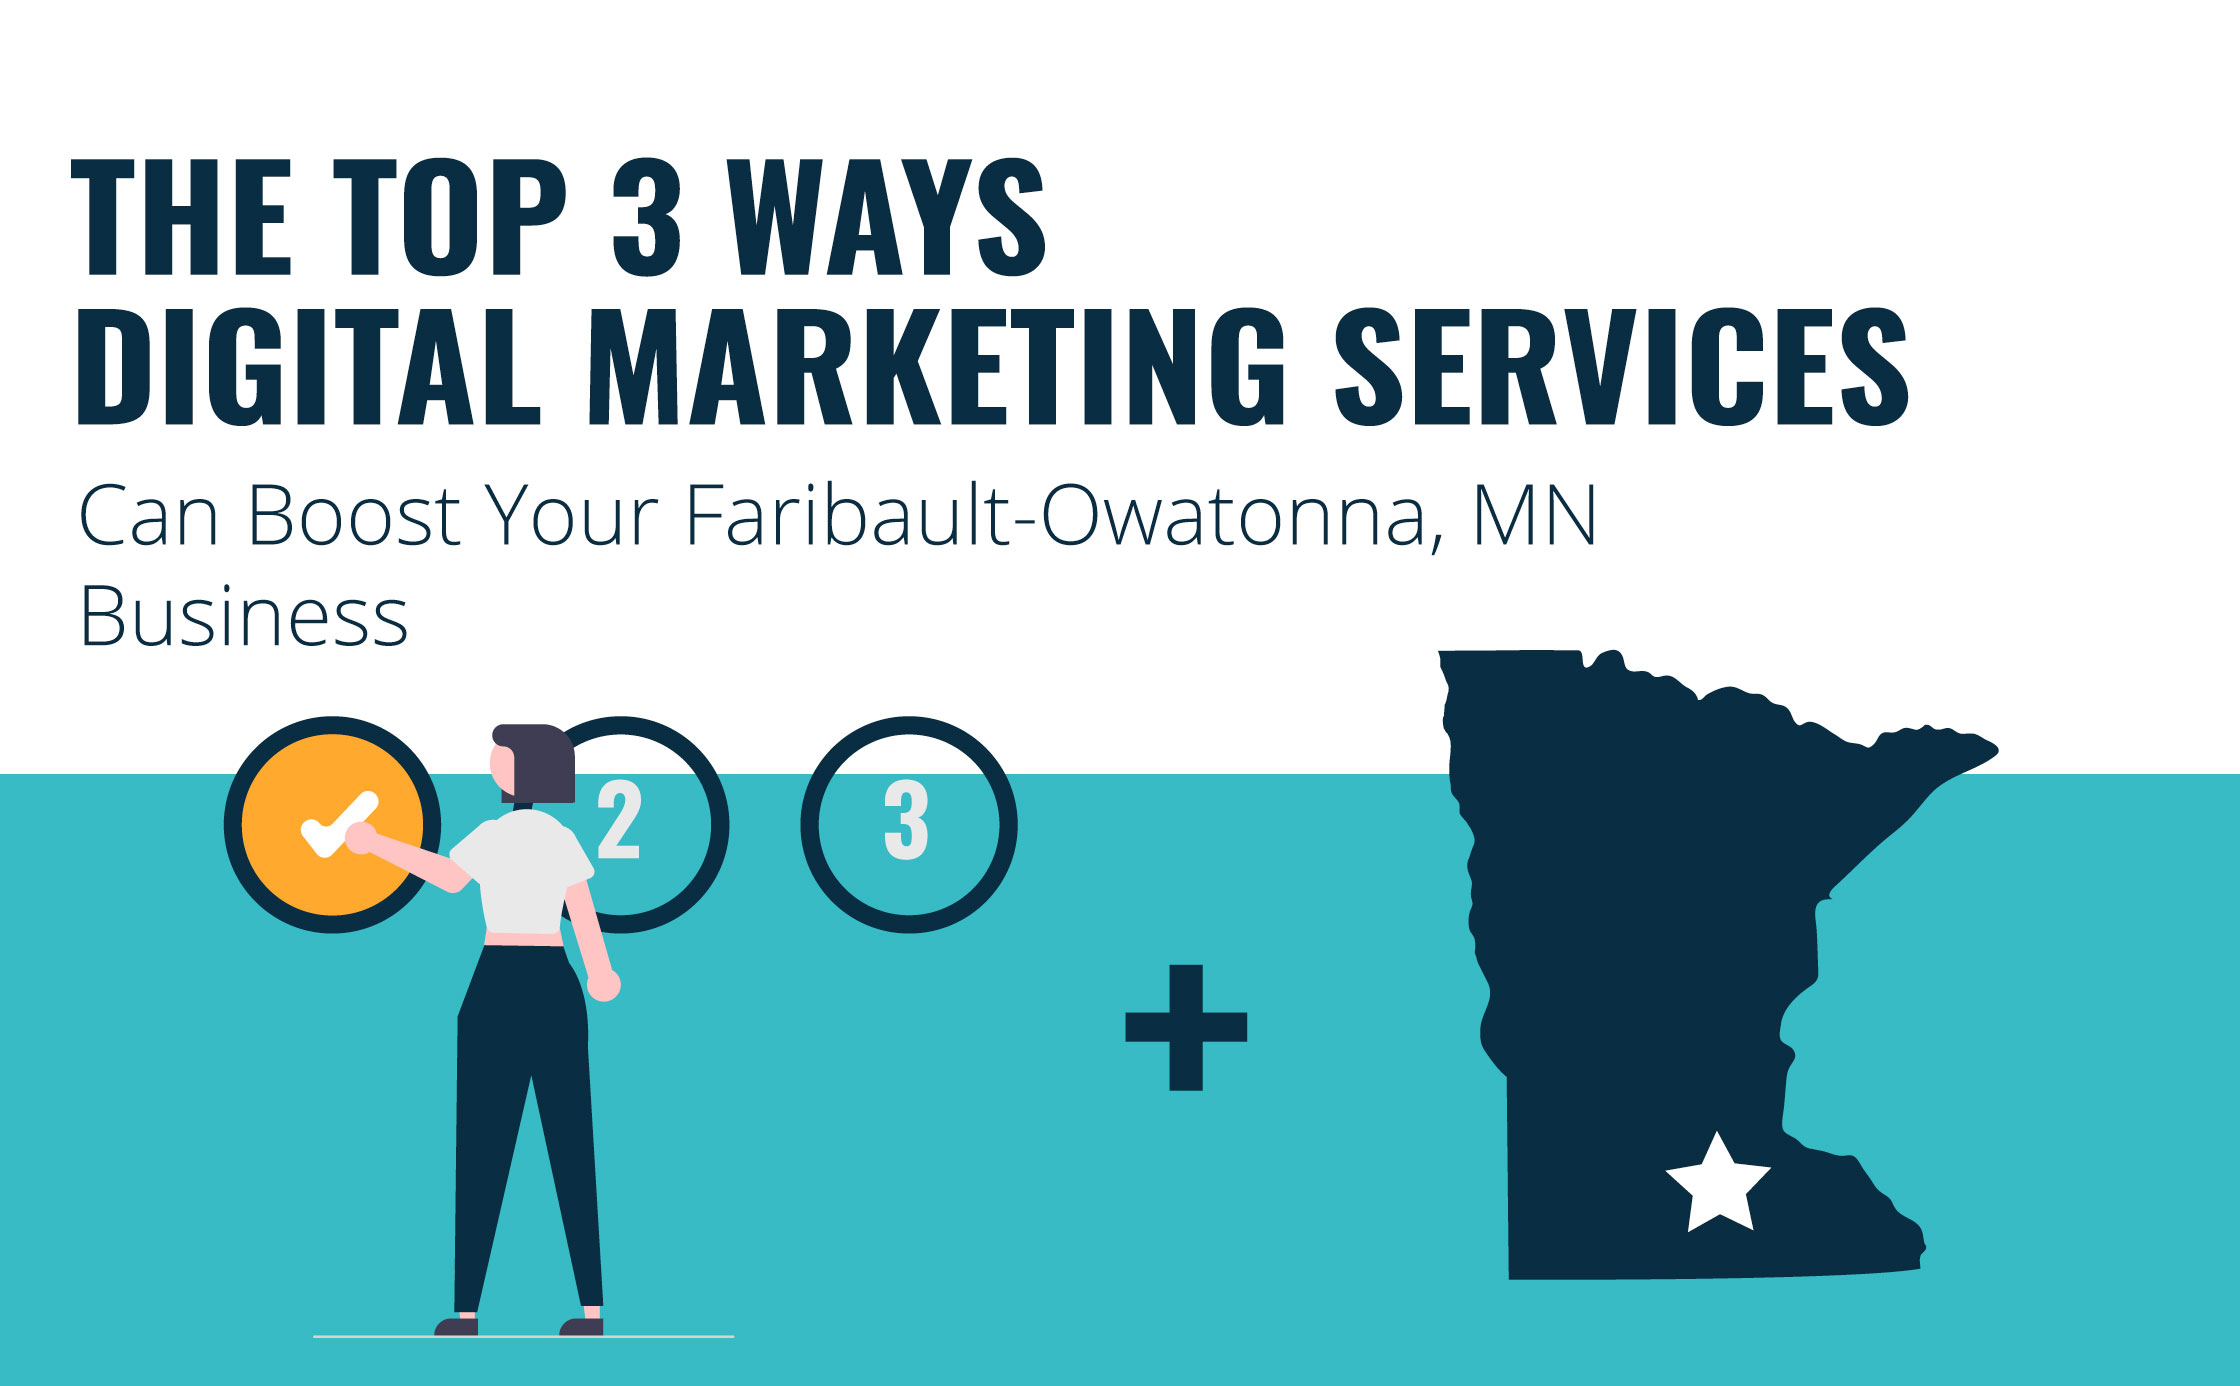 The Top 3 Ways Digital Marketing Services Can Boost Your Faribault-Owatonna, MN Business